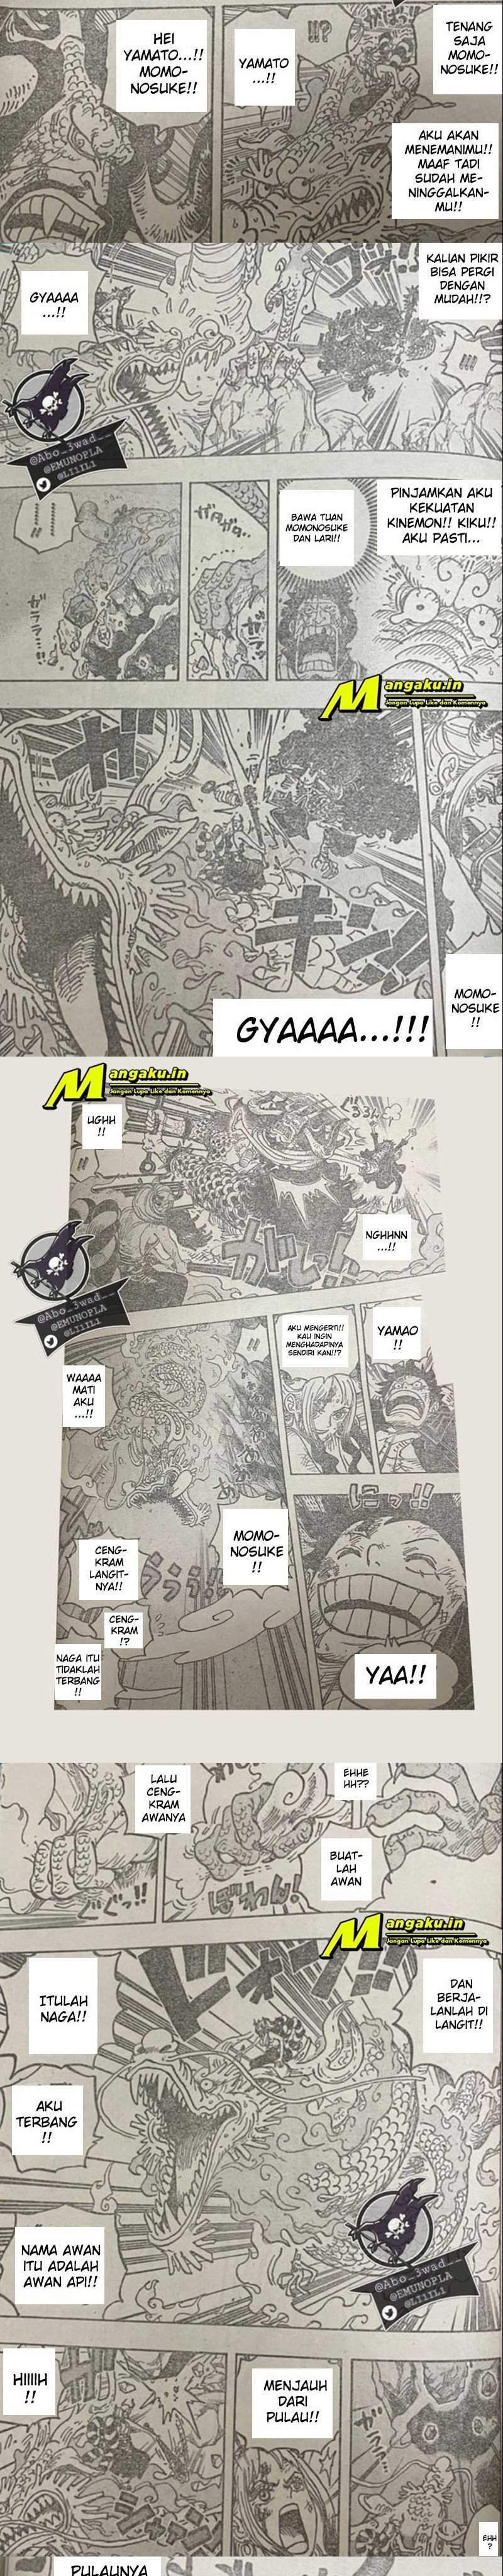 One Piece Chapter 1027 Lq - 33